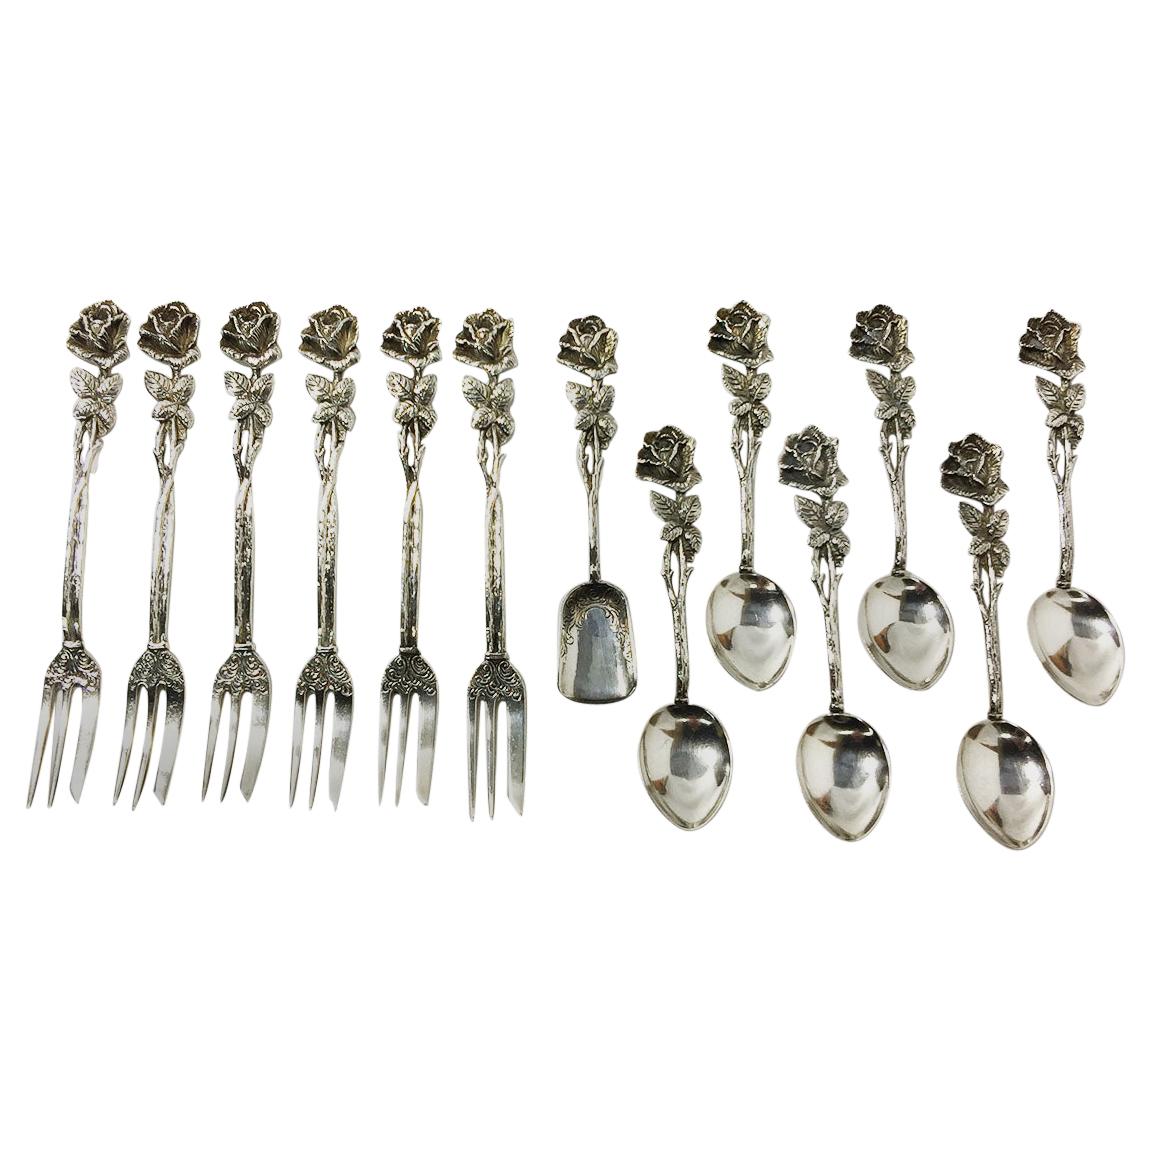 Silver Pastry Forks, Teaspoons and a Sugar Scoop by Christoph Widmann, Germany